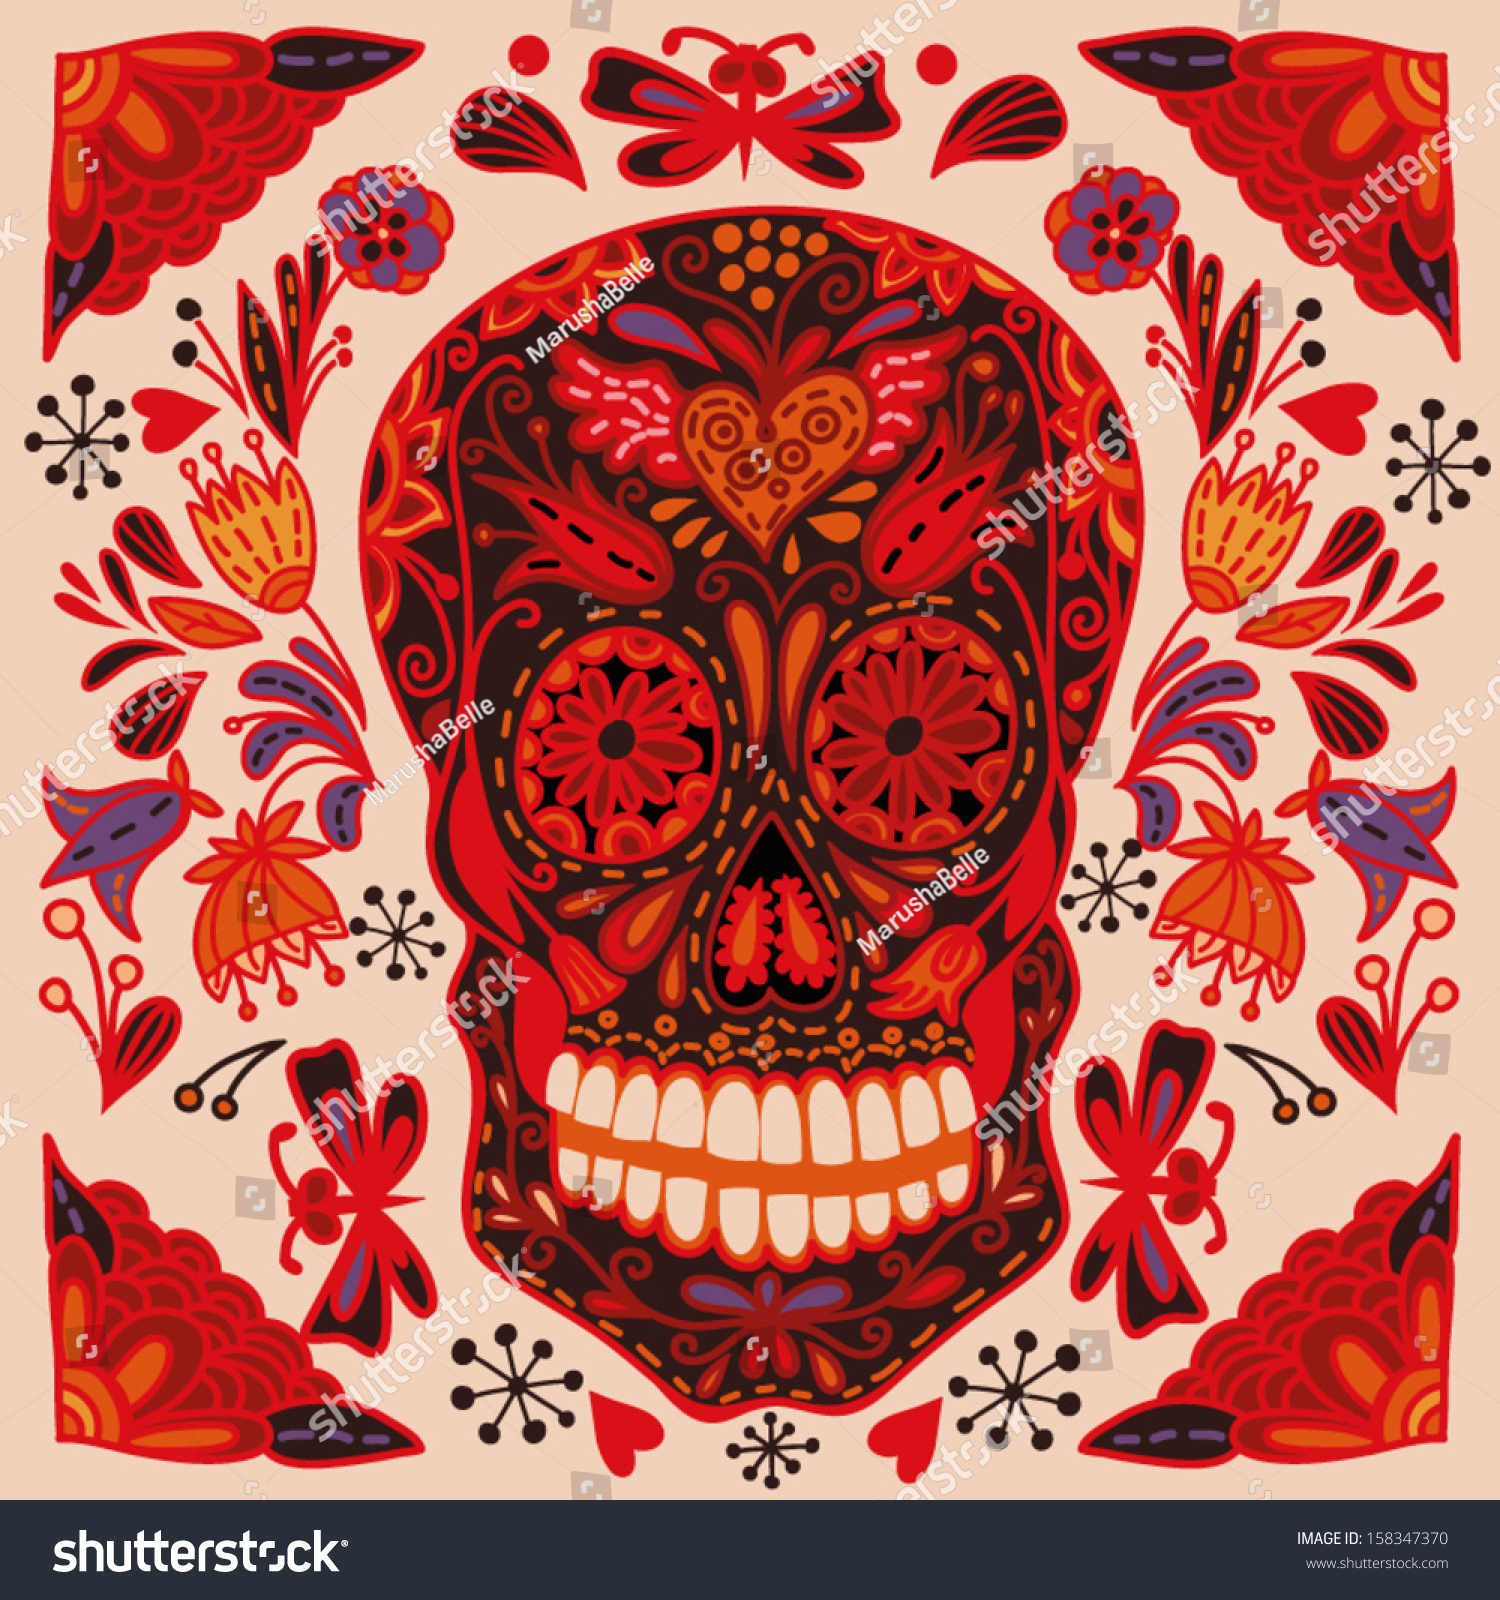 Day Of The Dead Colorful Skull With Floral Ornament. Fire Skull. Stock ...